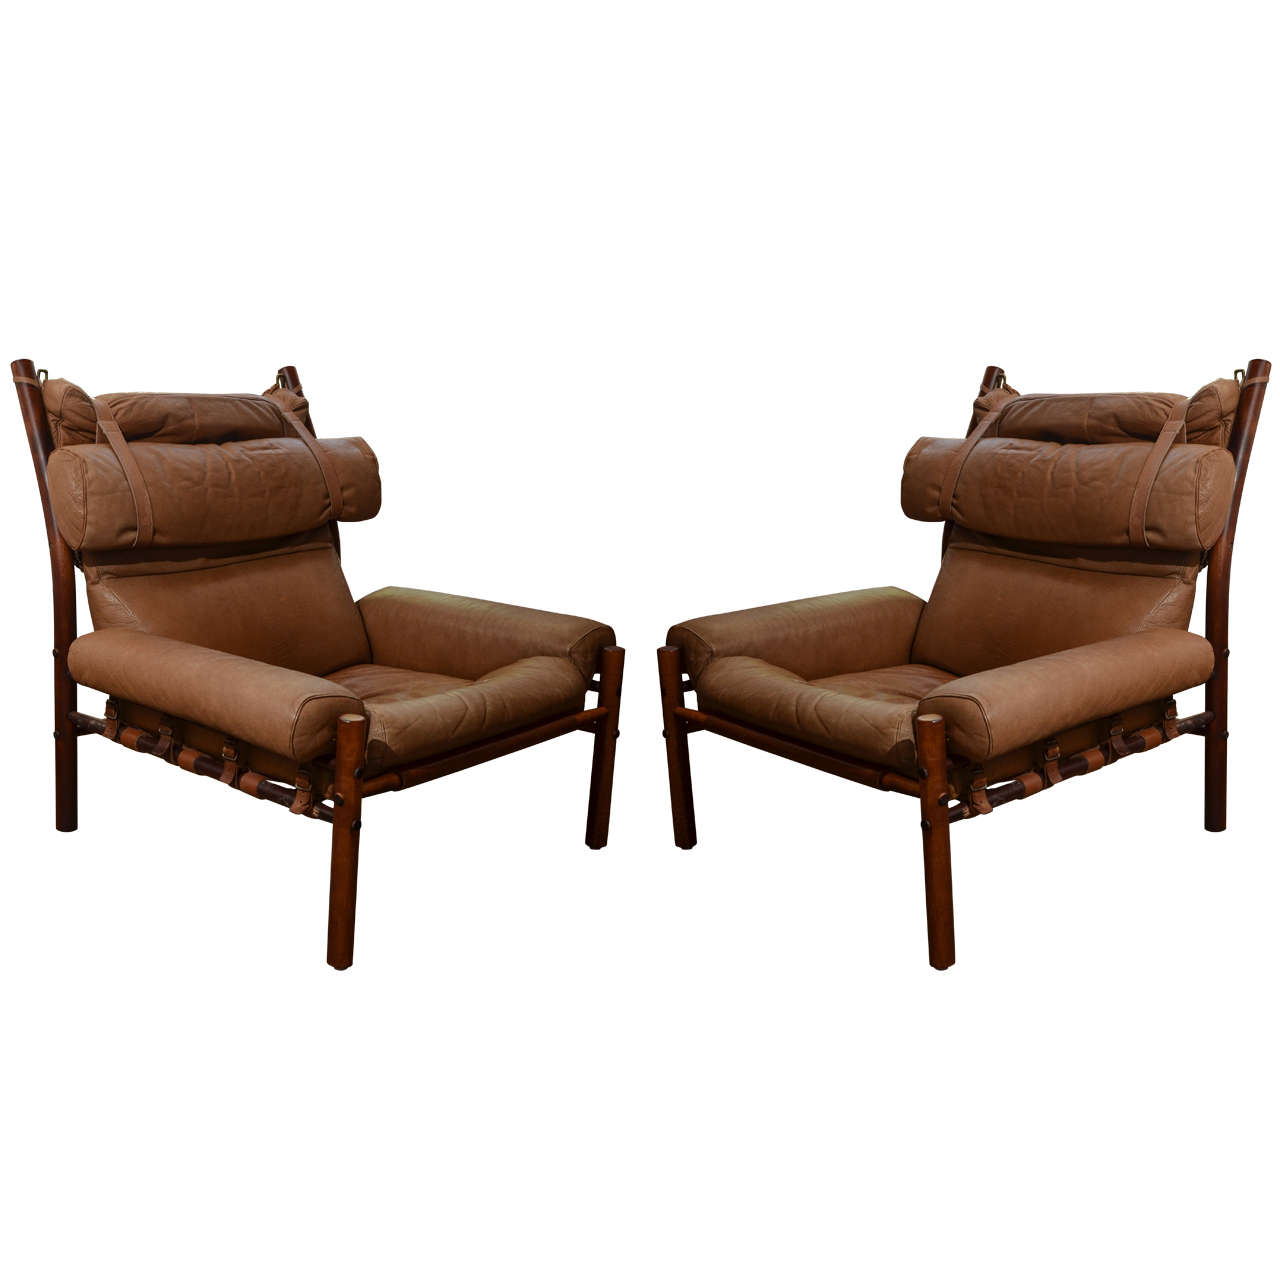 Pair of Midcentury Arne Norell "Inca" Chairs in Original Leather